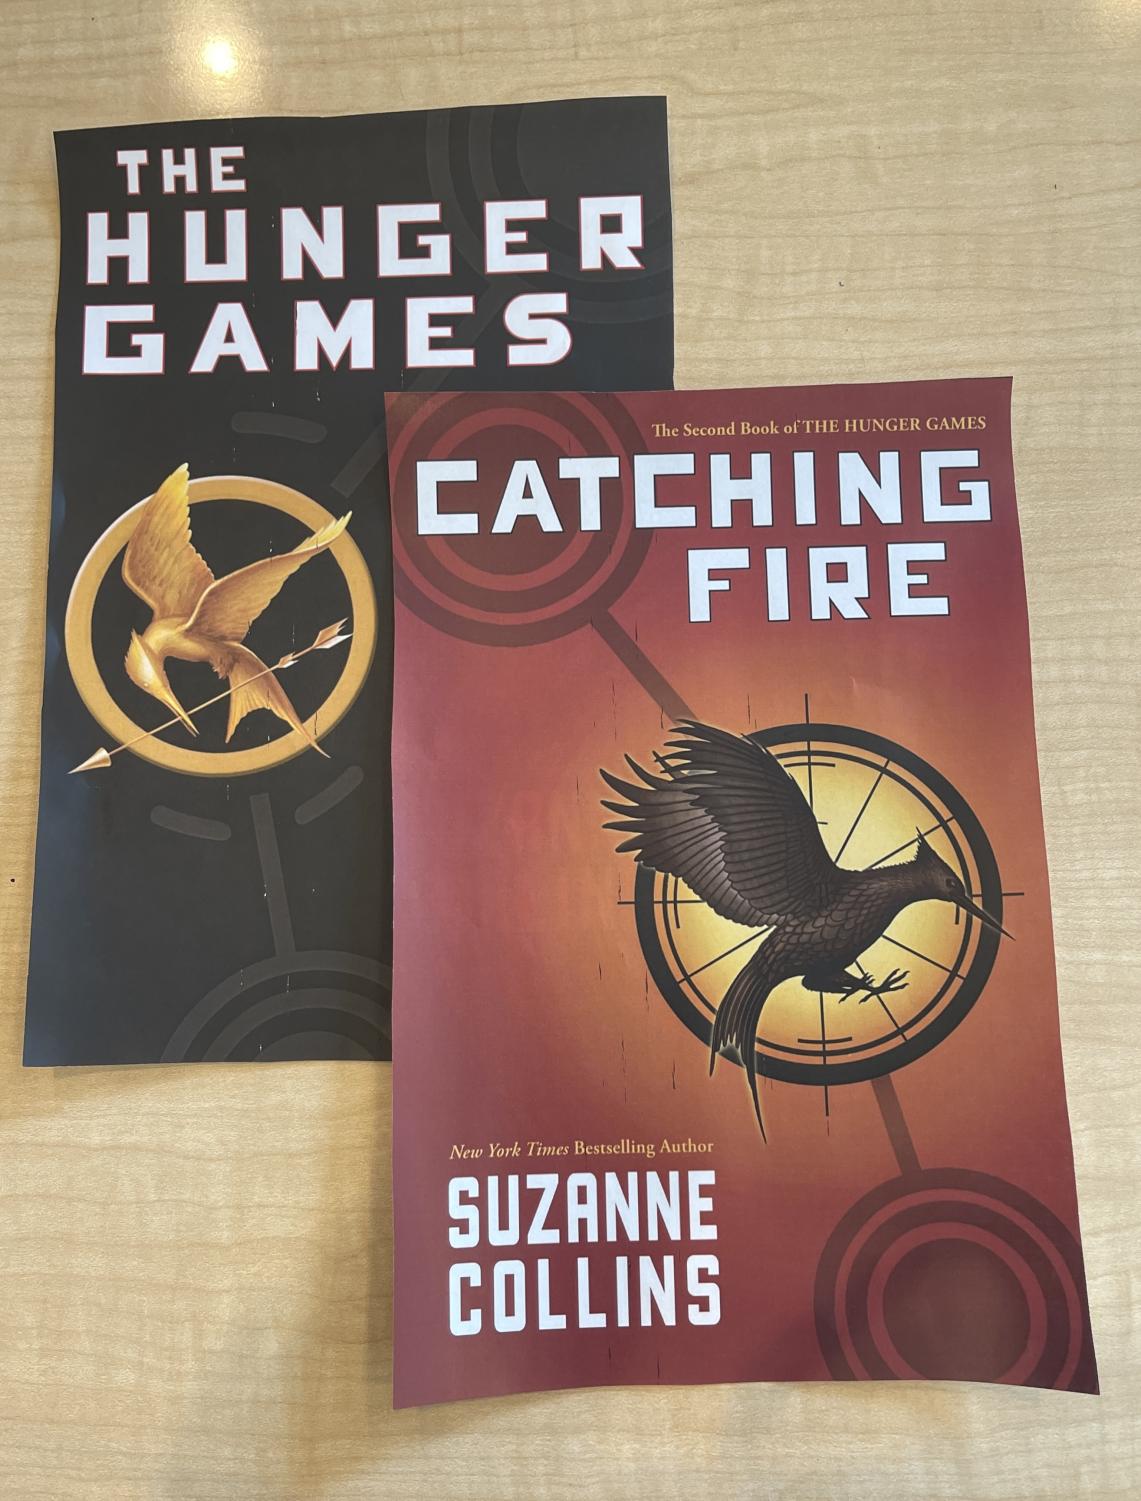 Scholastic Loss Widens as Sales of 'Hunger Games' Trilogy Fall - WSJ